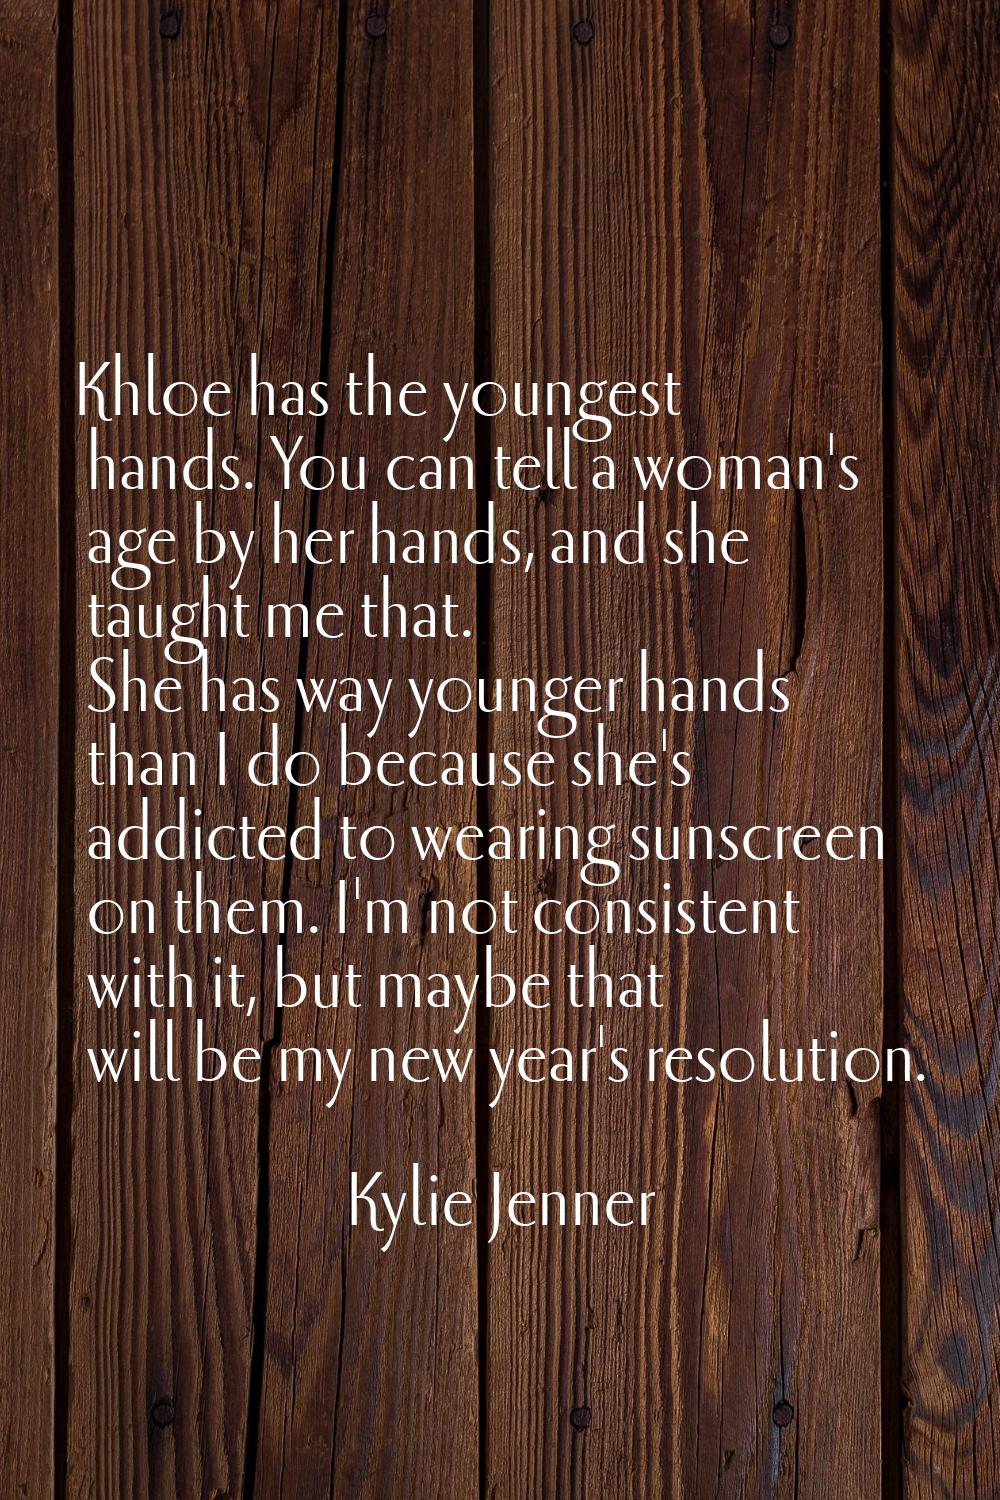 Khloe has the youngest hands. You can tell a woman's age by her hands, and she taught me that. She 